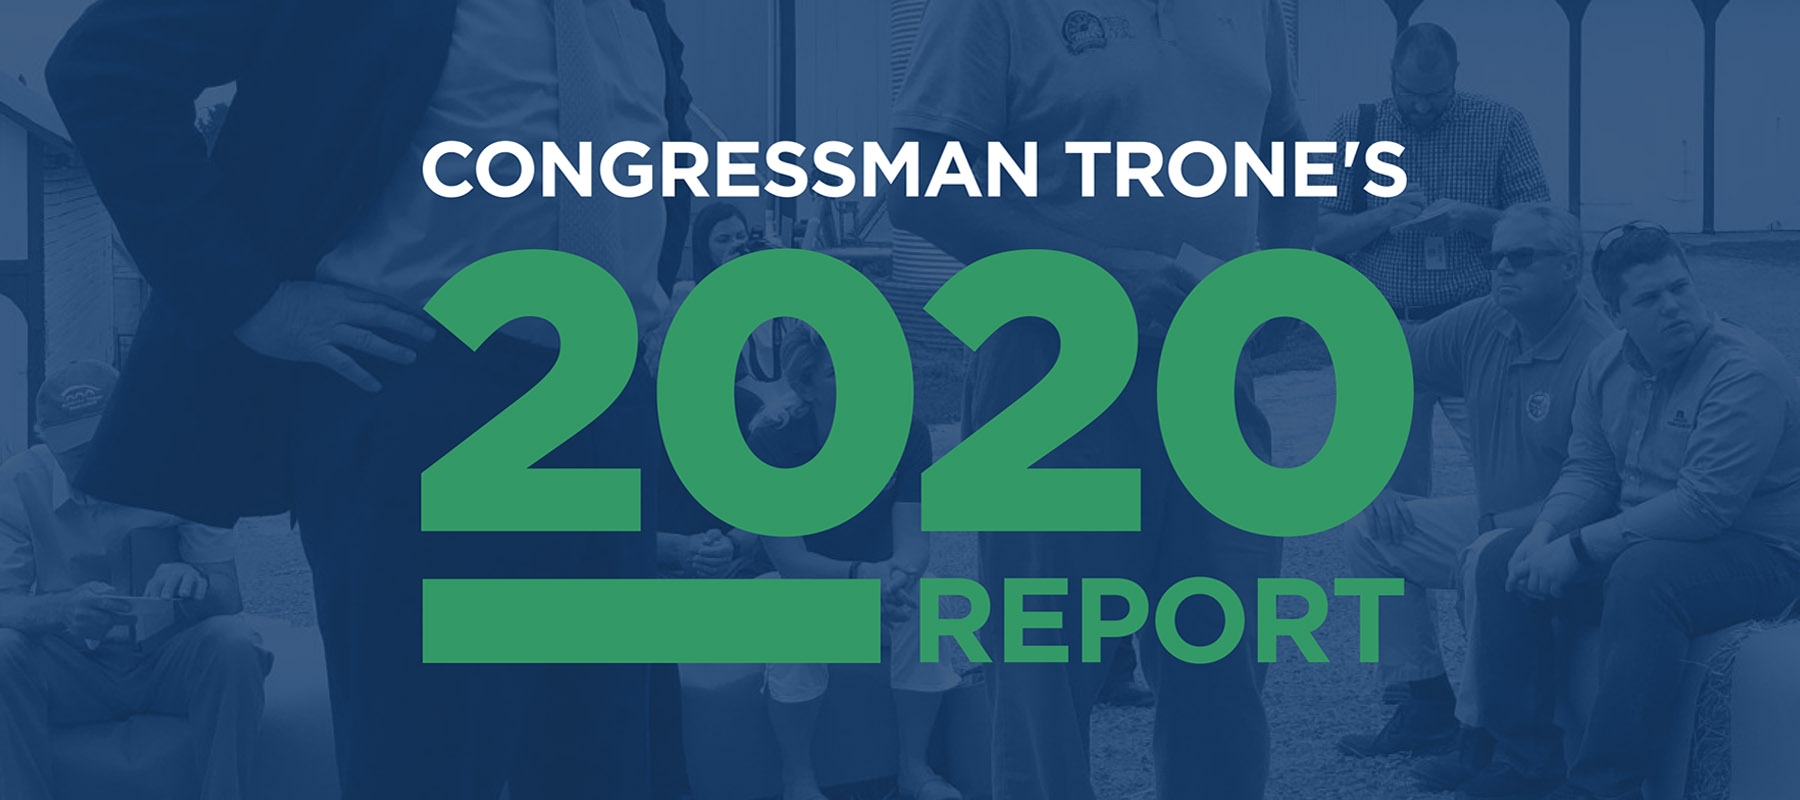 AMIDST COVID-19 CRISIS, NEW REPORT SHOWS TRONE HELPED RECORD NUMBER OF CONSTITUENTS IN 2020, SECURED LEGISLATIVE VICTORIES FOR OPIOID EPIDEMIC, CRIMINAL JUSTICE REFORM, AND MENTAL HEALTH